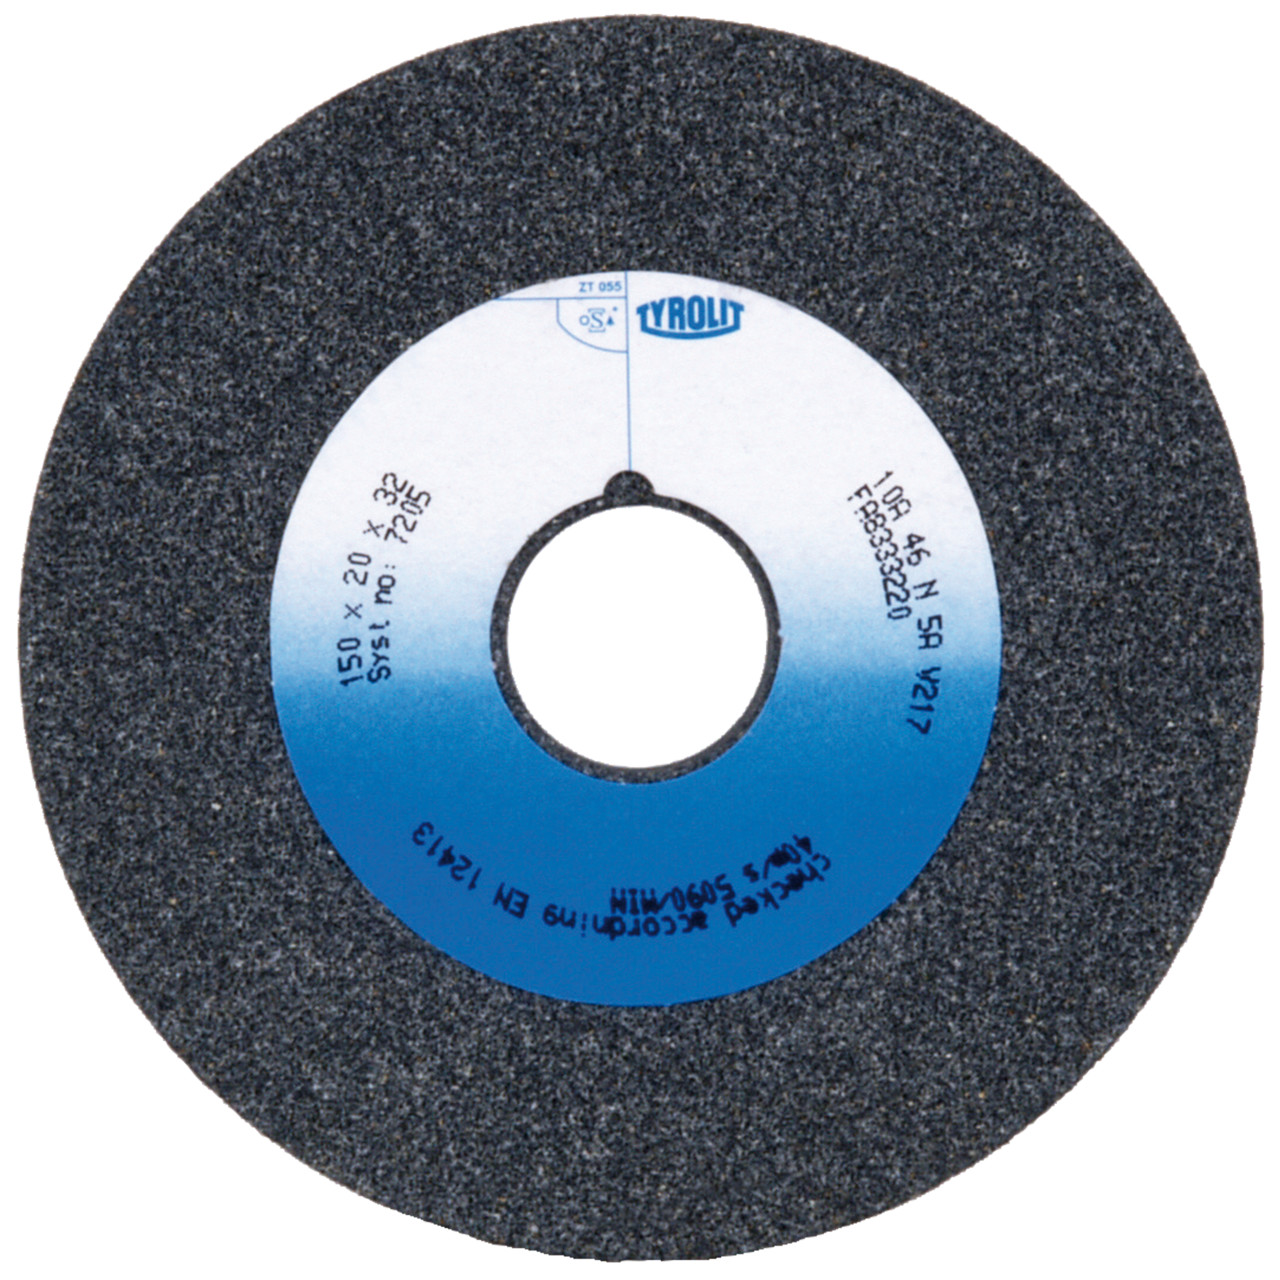 TYROLIT conventional ceramic grinding wheels DxDxH 300x40x76 For unalloyed and low-alloy steels, shape: 1, Art. 34983